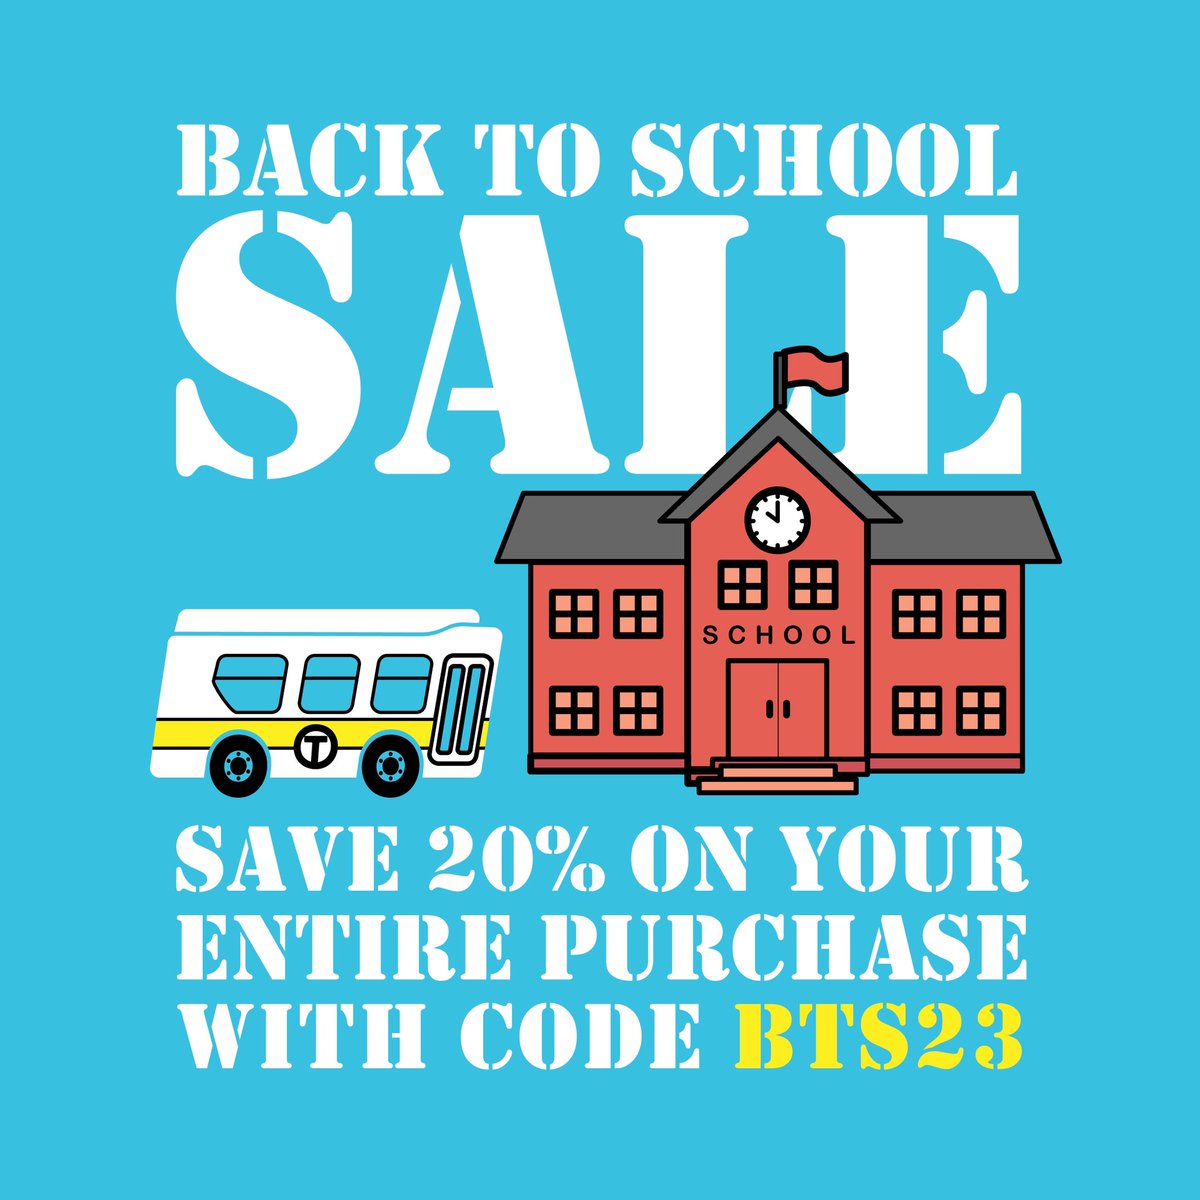 Our Back to School Sale starts today. Has your T-loving #Boston toddler outgrown his favorite #MBTA shirt? #bostonkids #bostonparents